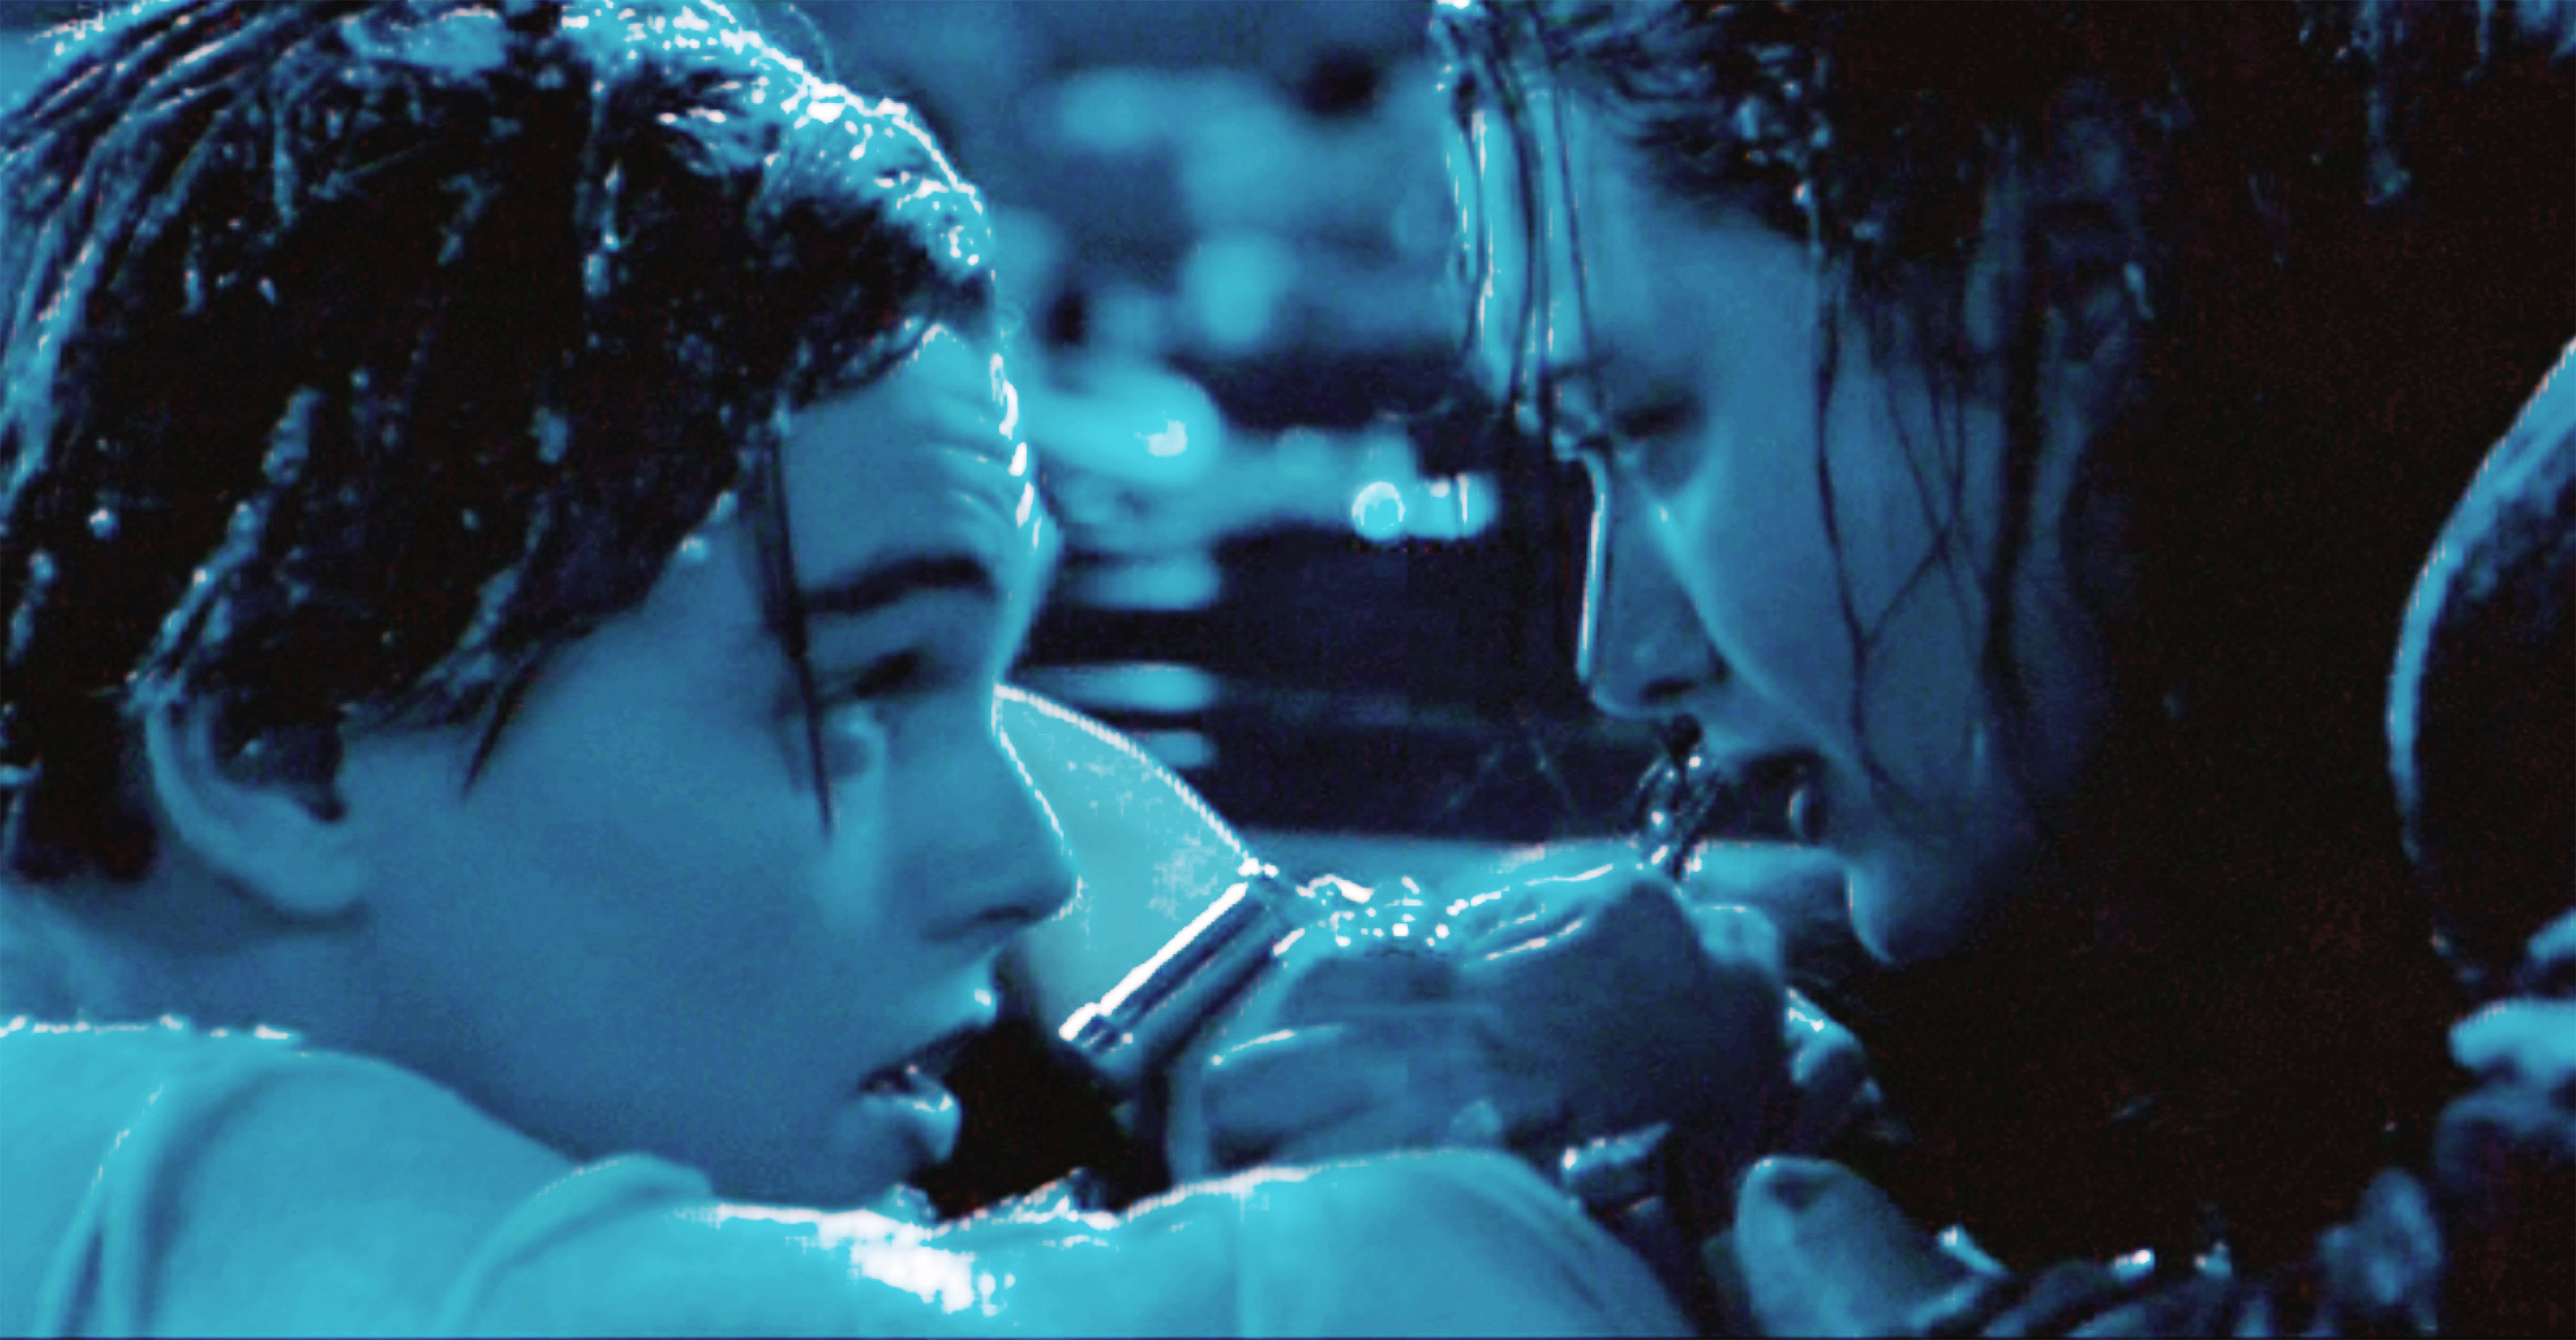 Leonardo DiCaprio as Jack and Kate Winslet as Rose in &quot;Titanic&quot; in the water